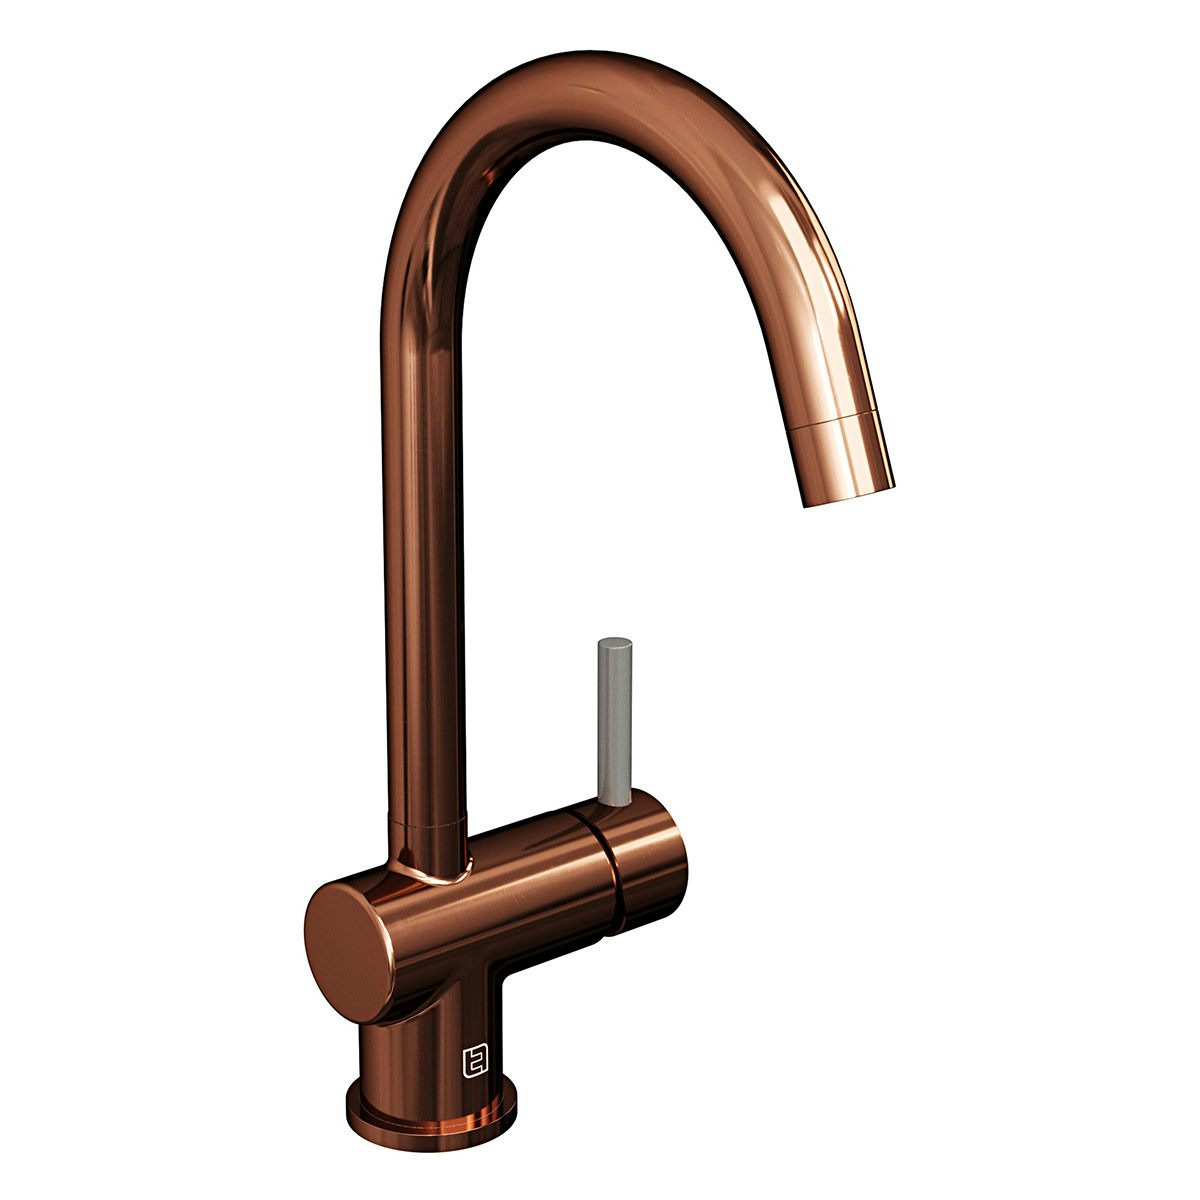 The Tap Factory Vibrance kitchen mixer tap with copper and anthracite grey finish